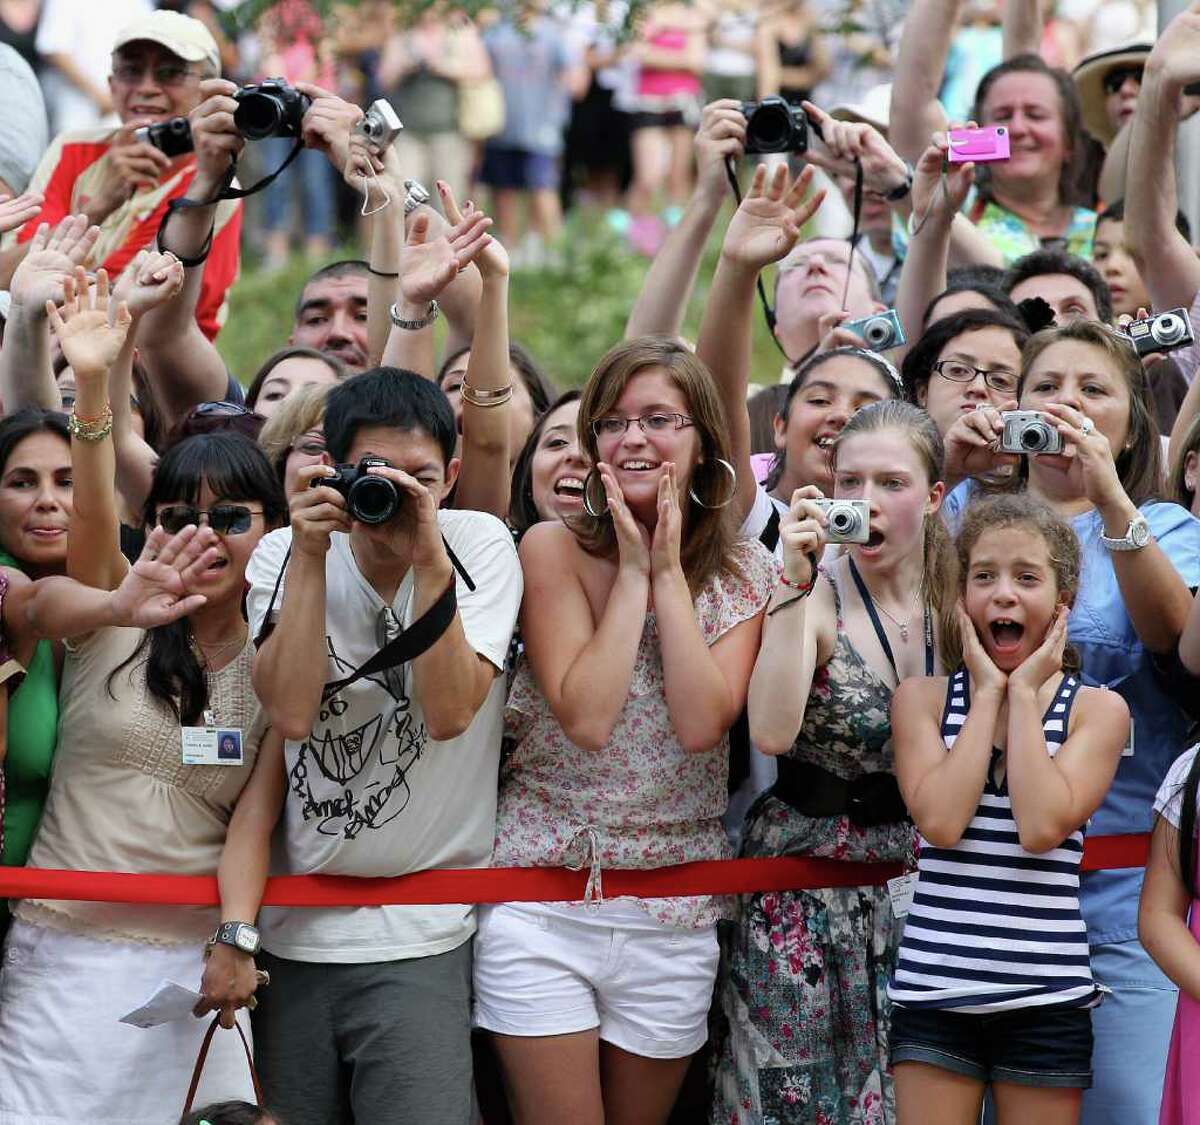 Royal fans try to catch a glimpse of Prince William, Duke of Cambridge and Catherine, Duchess of Cambridge as they visit Sainte-Justine University Hospital in Montreal on Saturday, July 2, 2011.  The newly married royal couple were on the third day of their first joint overseas tour. The 12-day visit to North America will take in some of the more remote areas of Canada, such as Prince Edward Island, Yellowknife and Calgary.